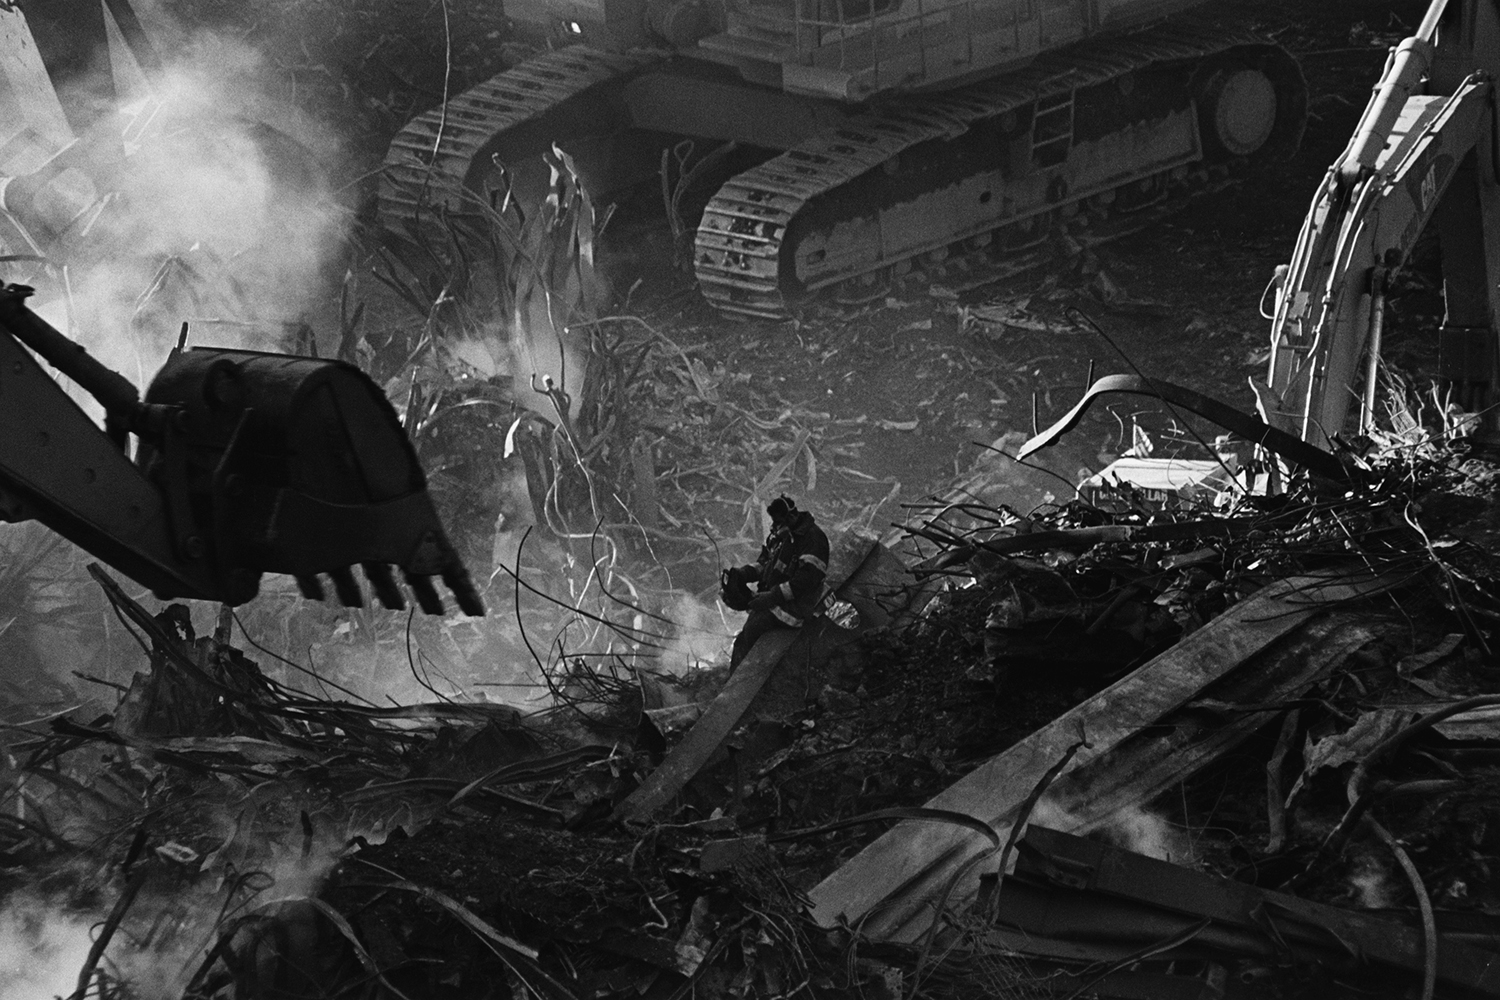   Firefighter in the rubble of Ground Zero  New York, NY. &nbsp;2001 